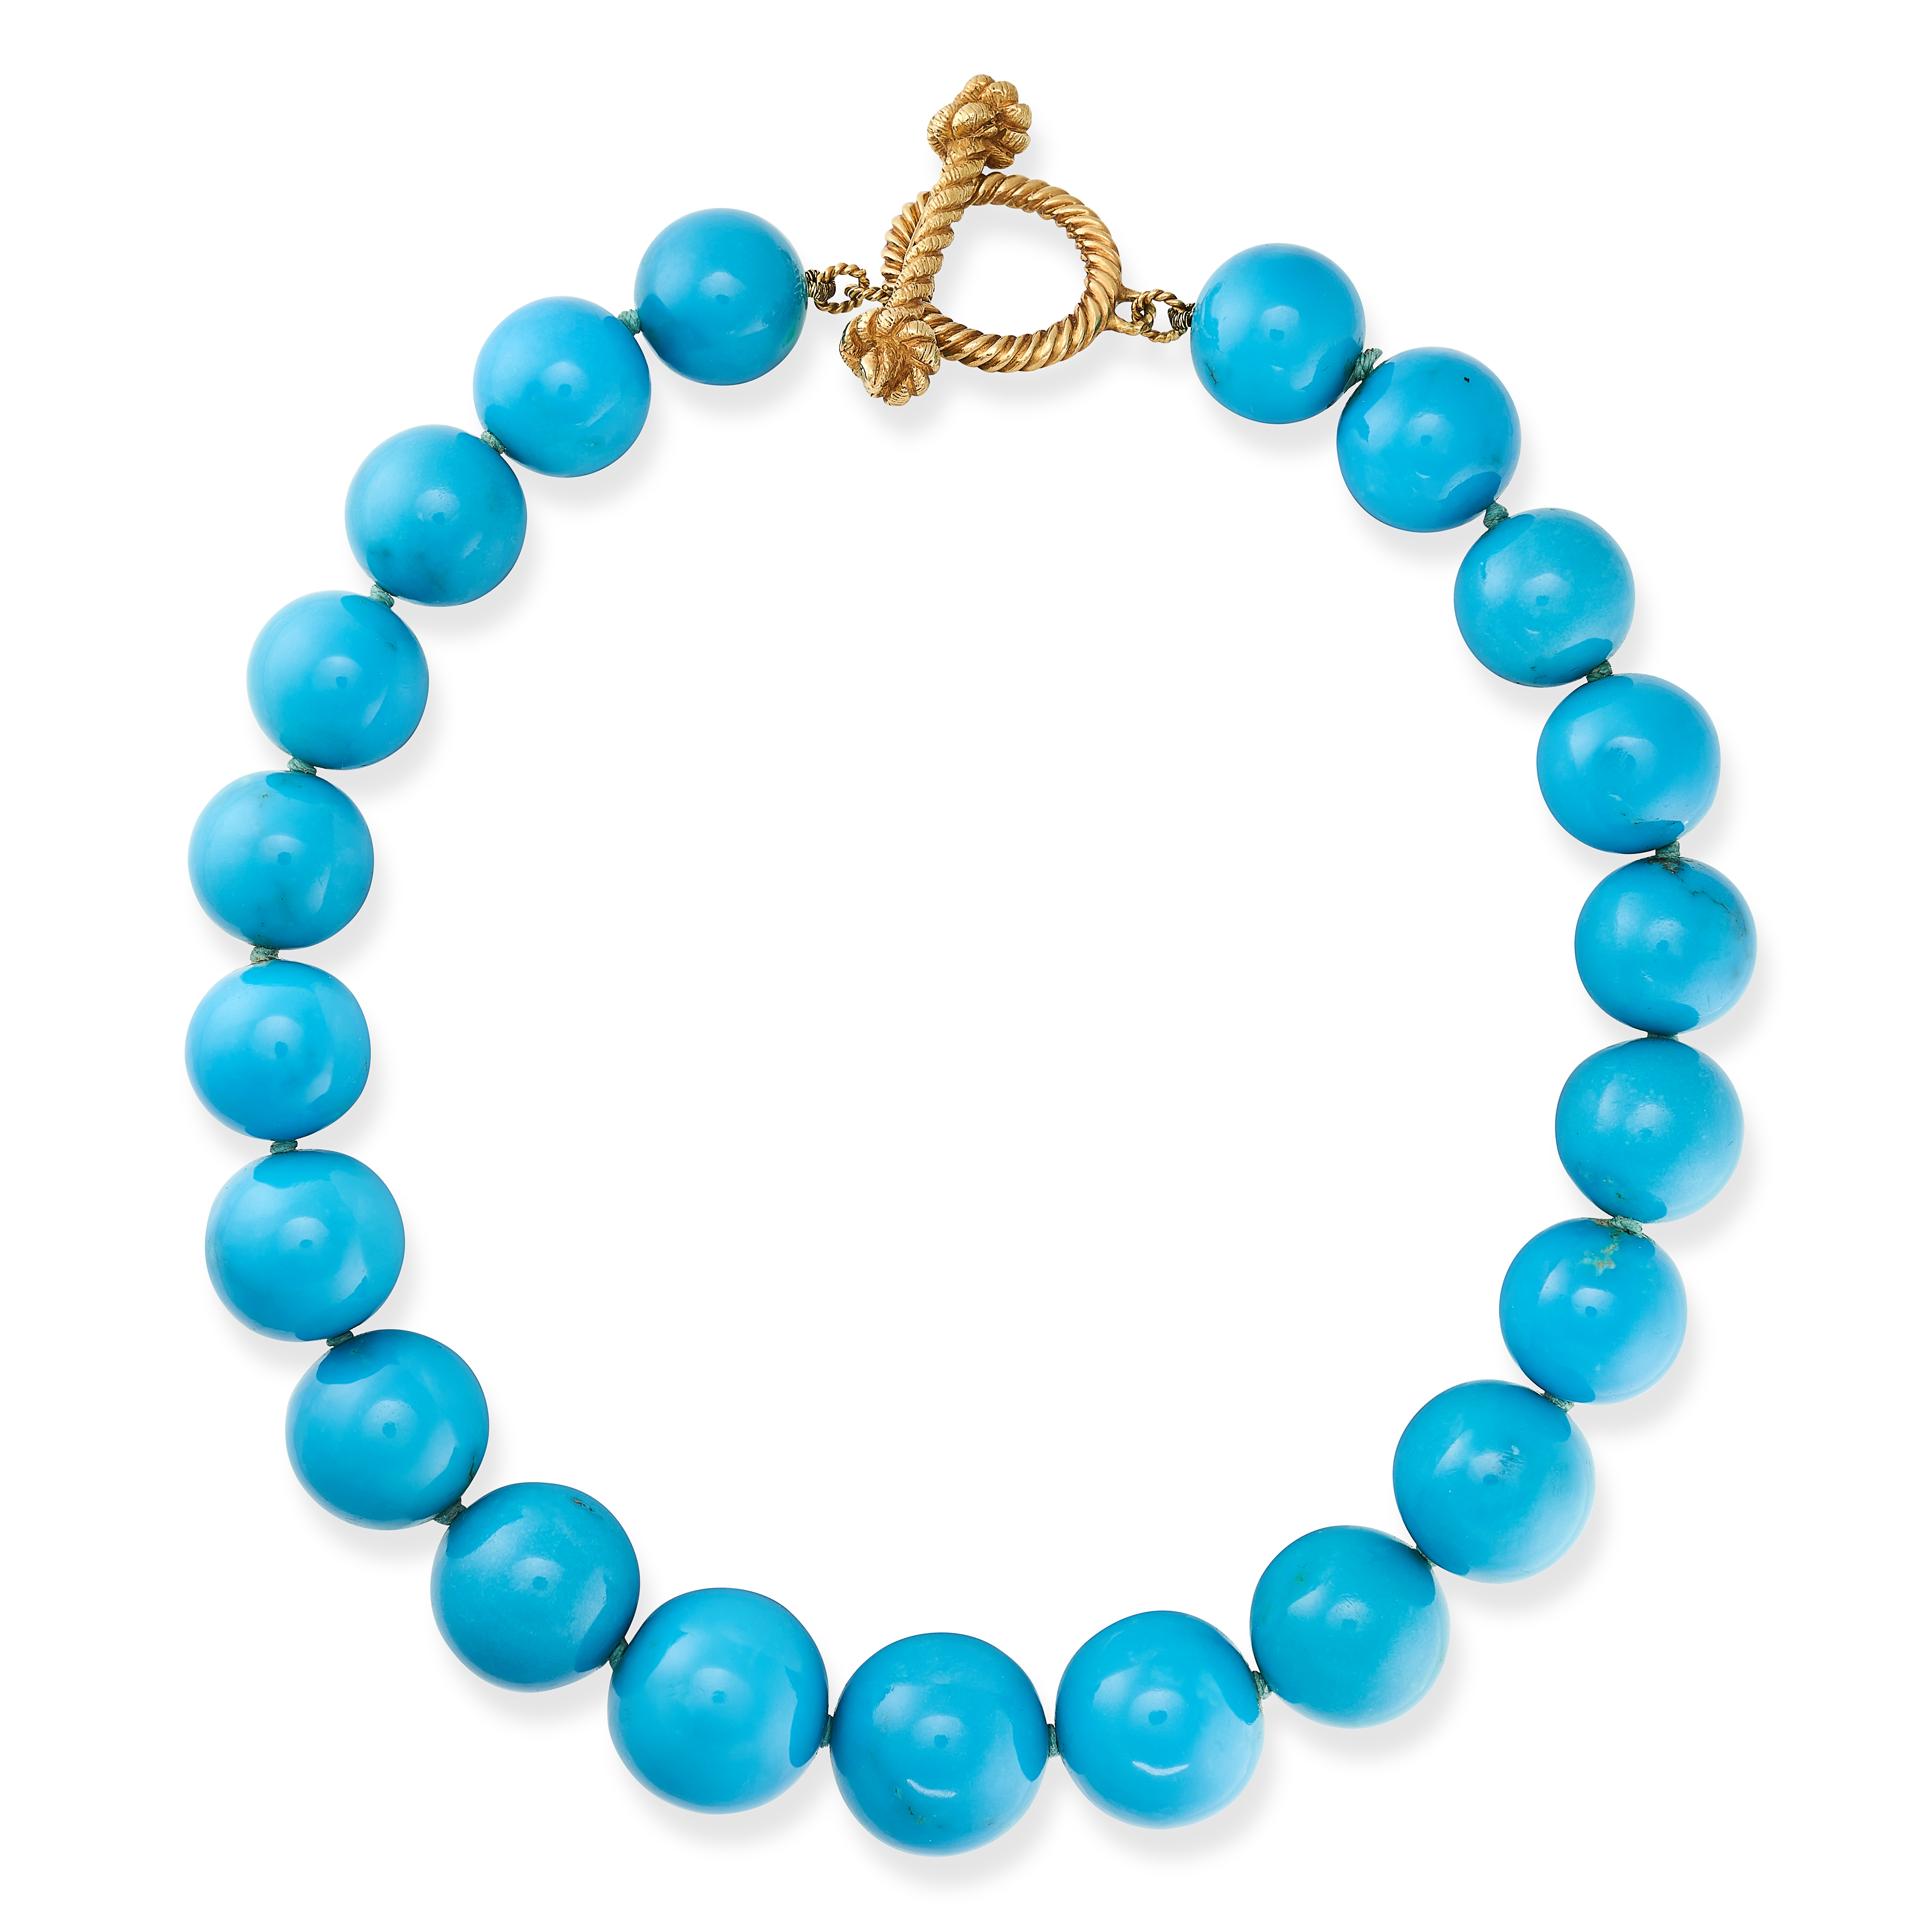 AN EXCEPTIONAL TURQUOISE BEAD NECKLACE in 18ct yellow gold, comprising a single row of graduated